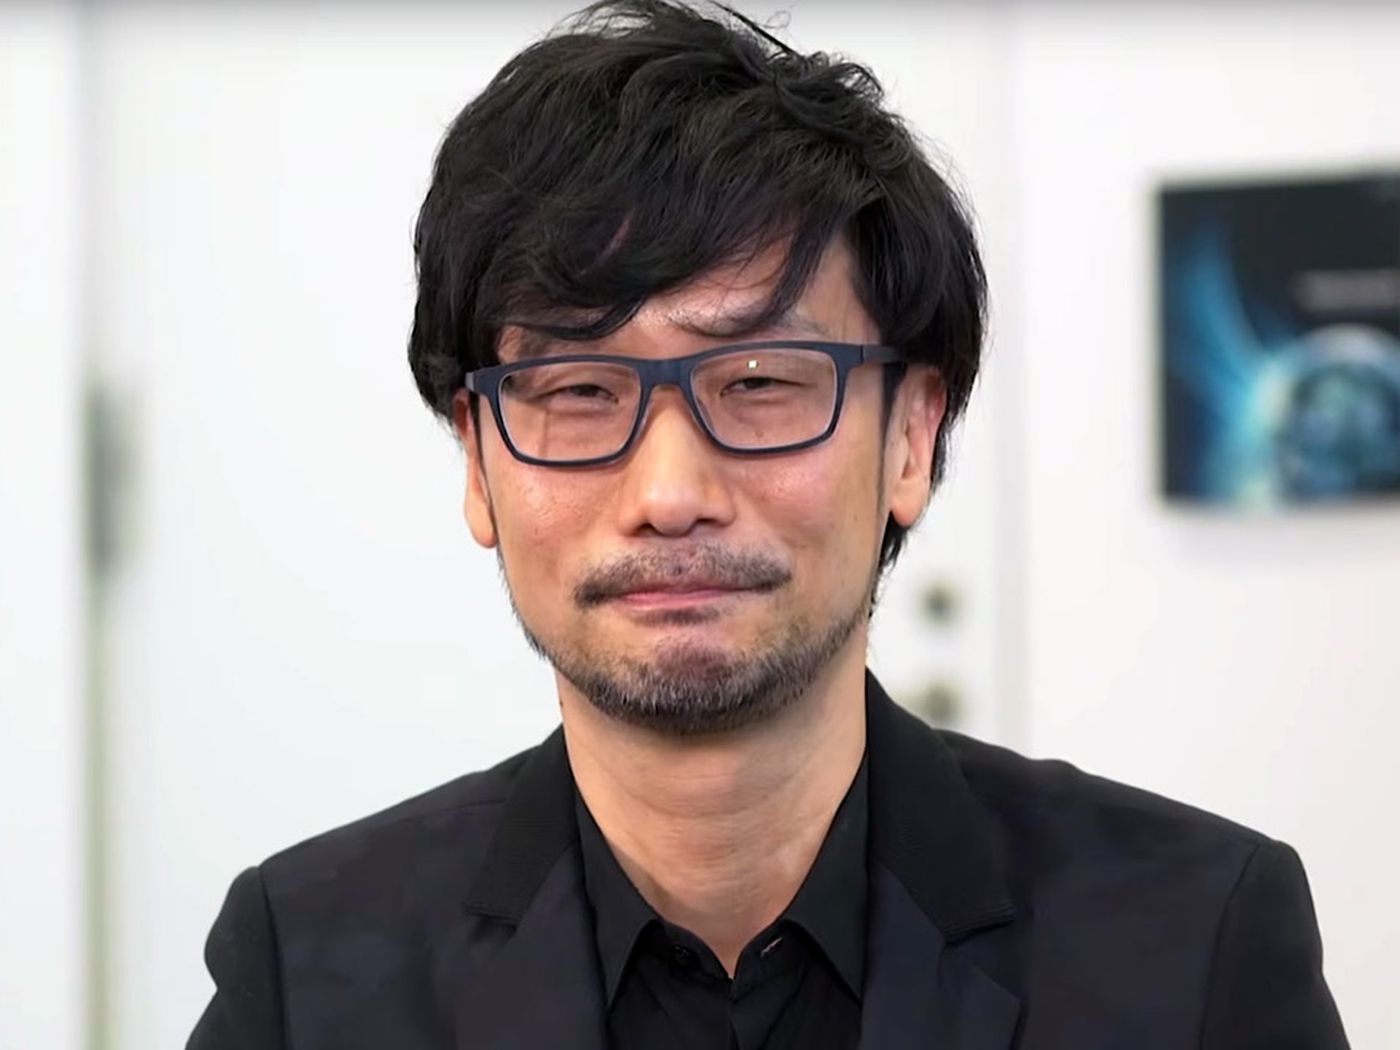 Hideo Kojima forms new studio and partnership with Sony, confirms departure from Konami